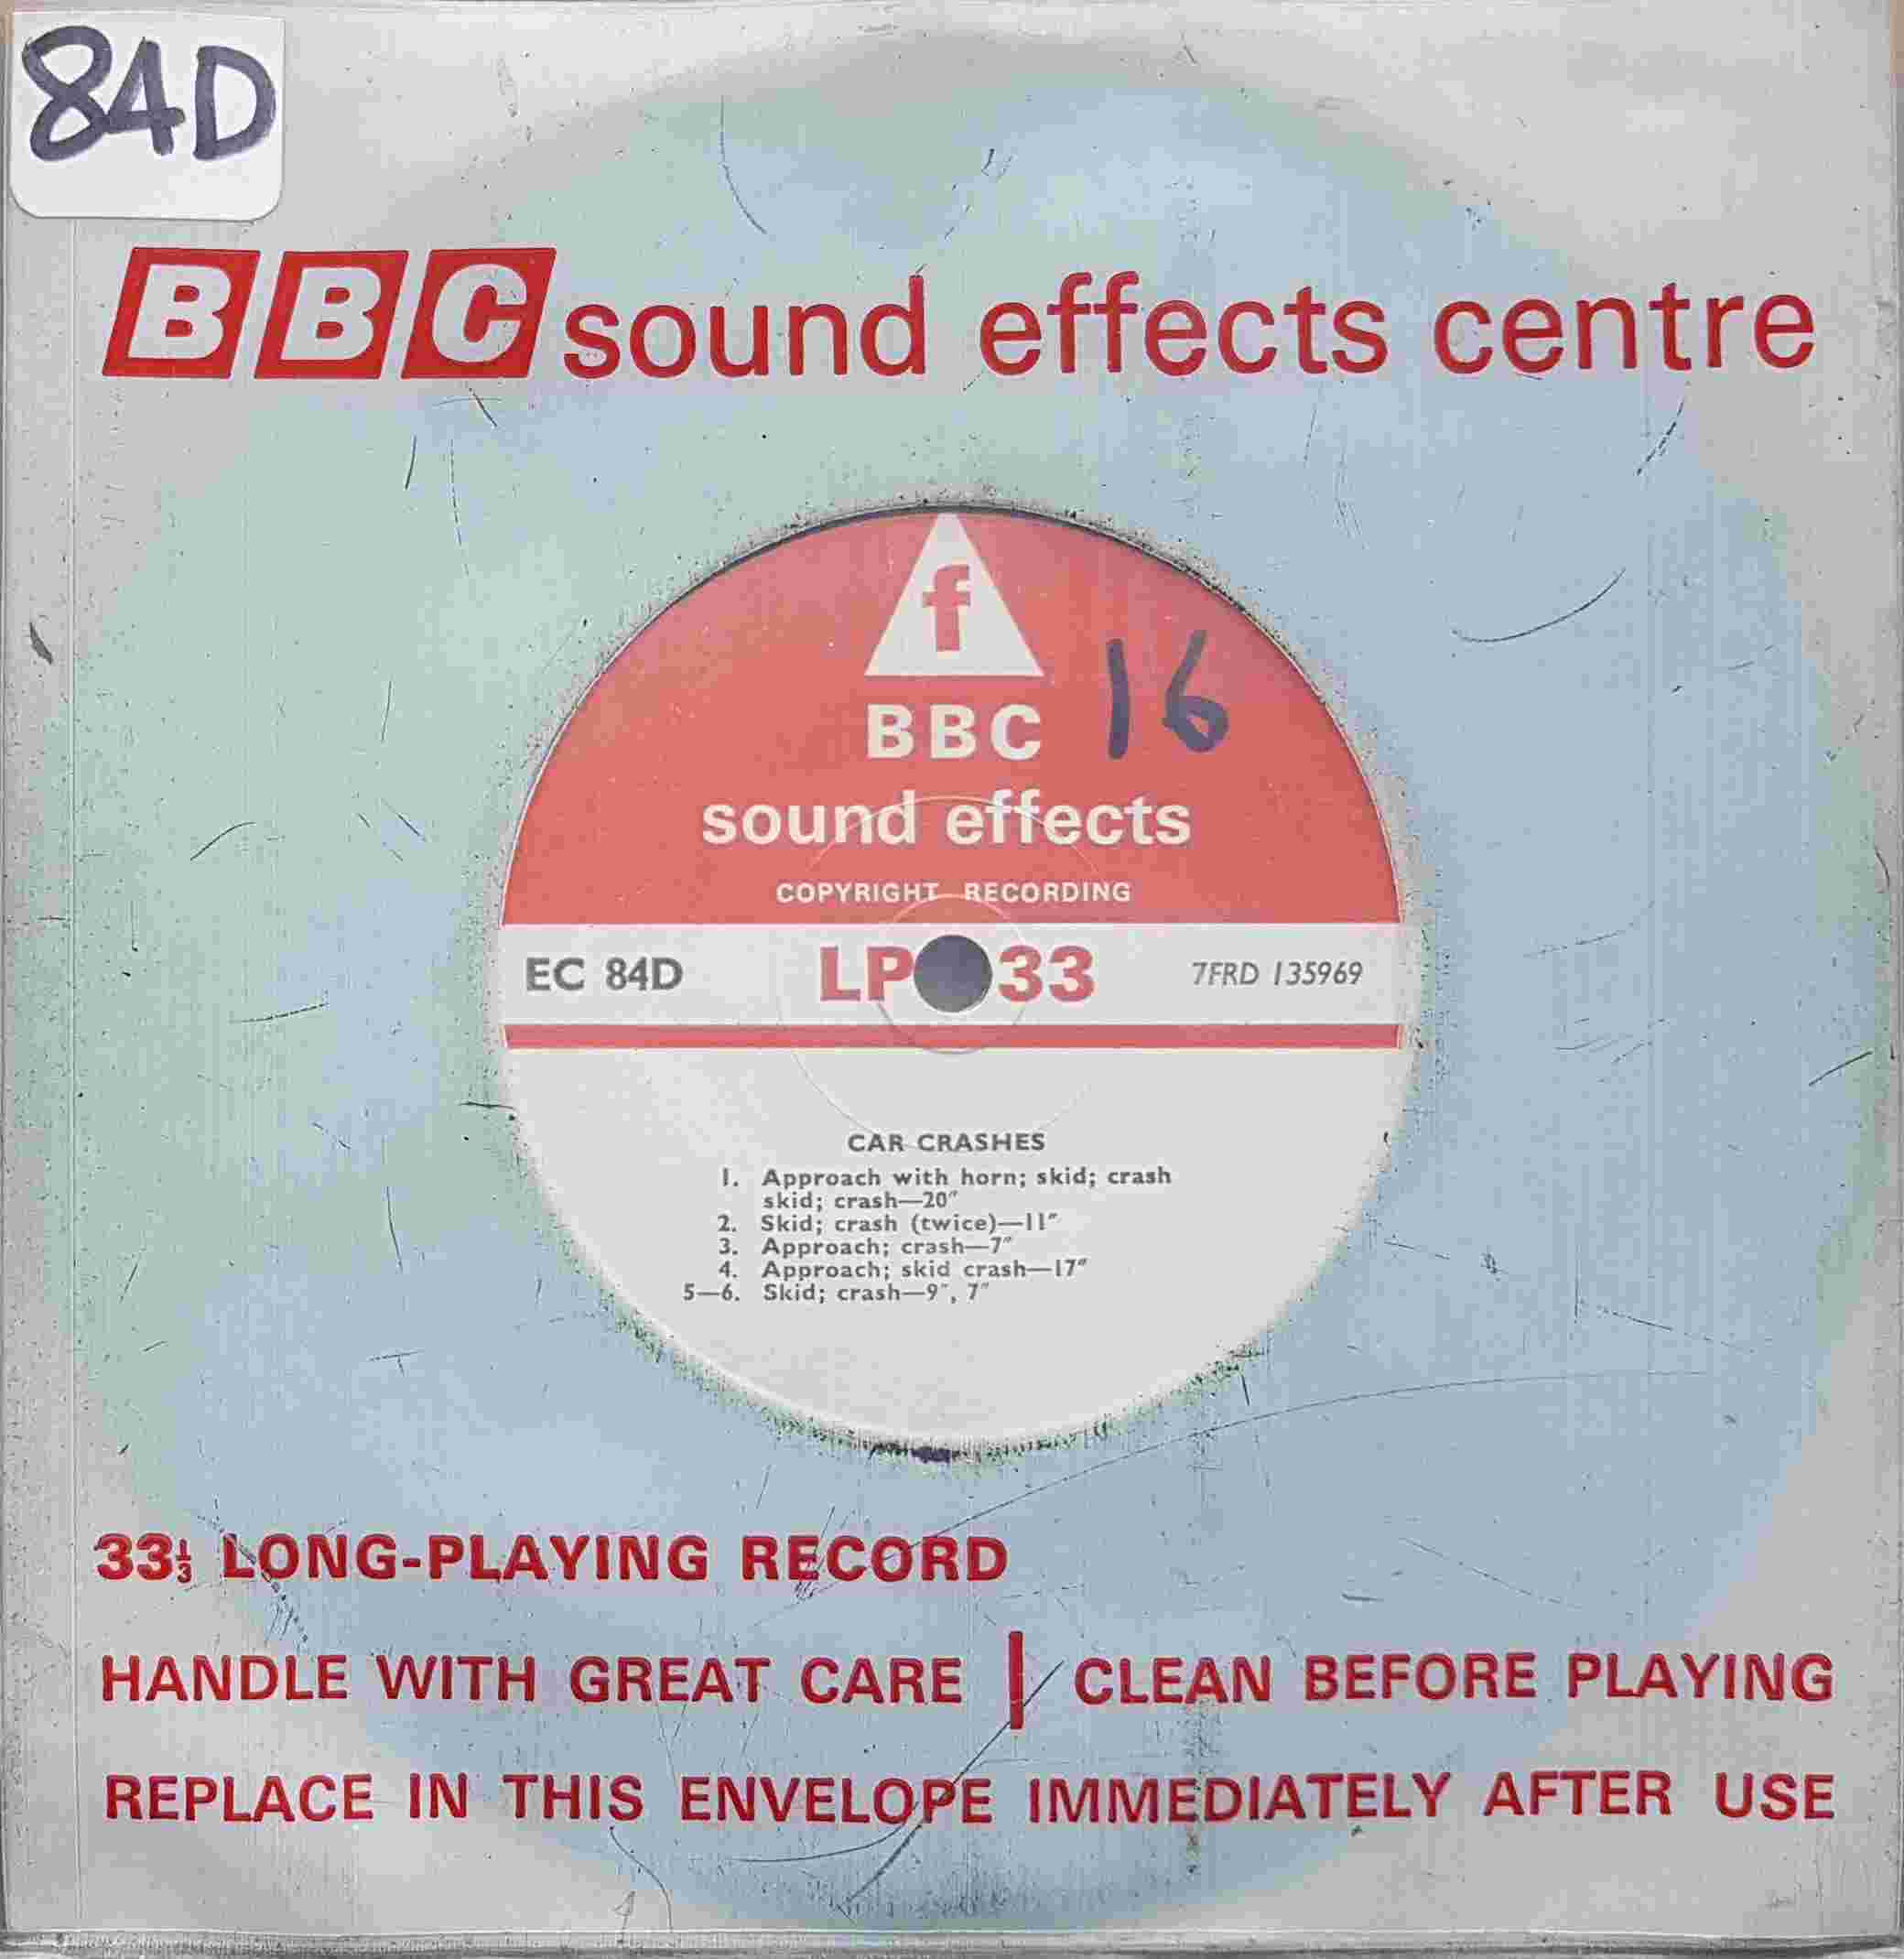 Picture of EC 84D Car crashes by artist Not registered from the BBC singles - Records and Tapes library